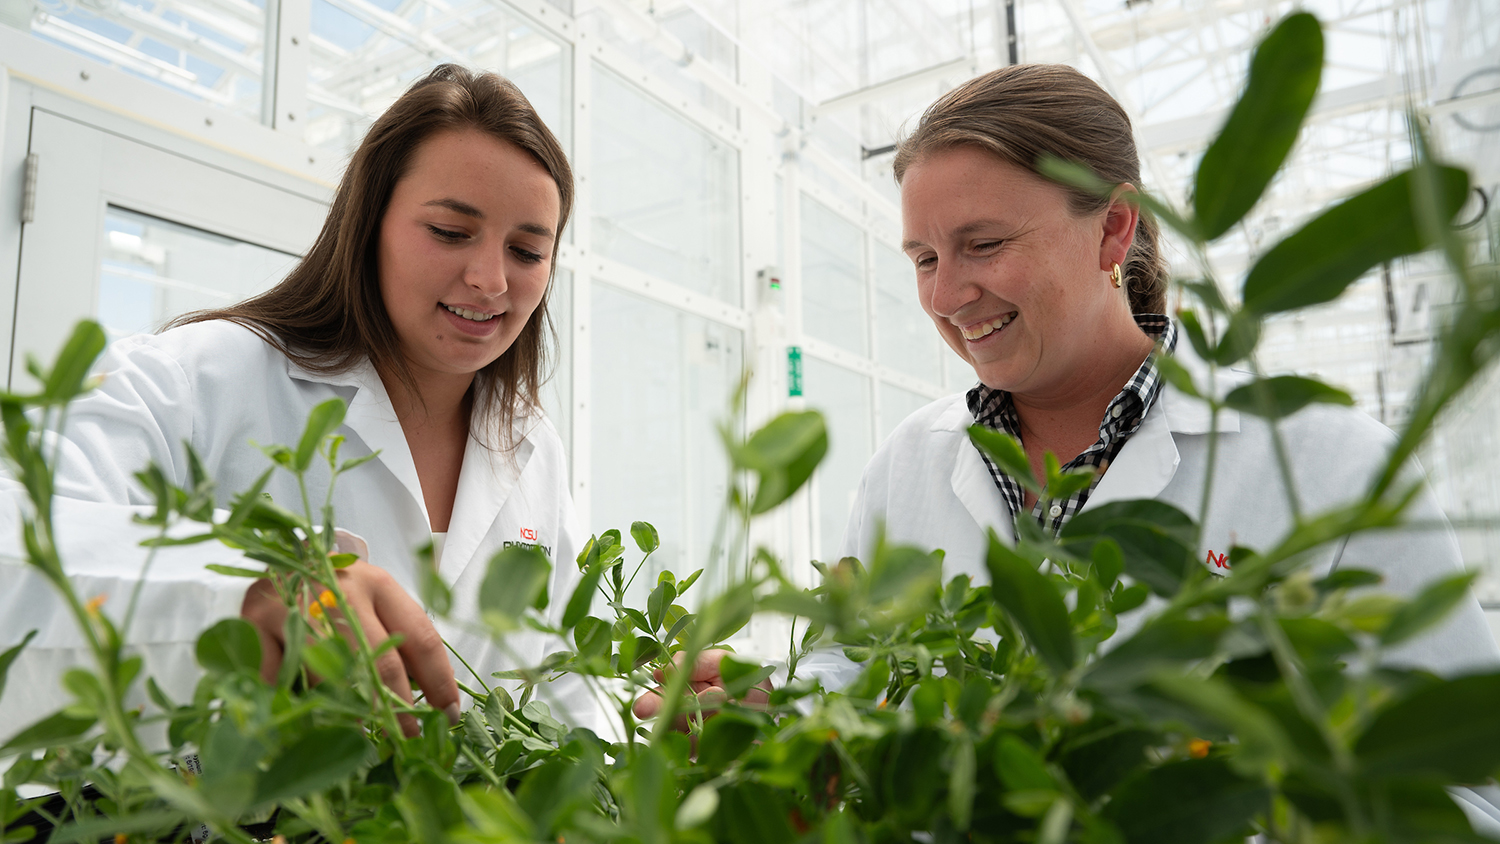 Rachel Vann, Department of Crop and Soil Sciences, works with extension interns inside of the plant sciences building on Centennial campus.